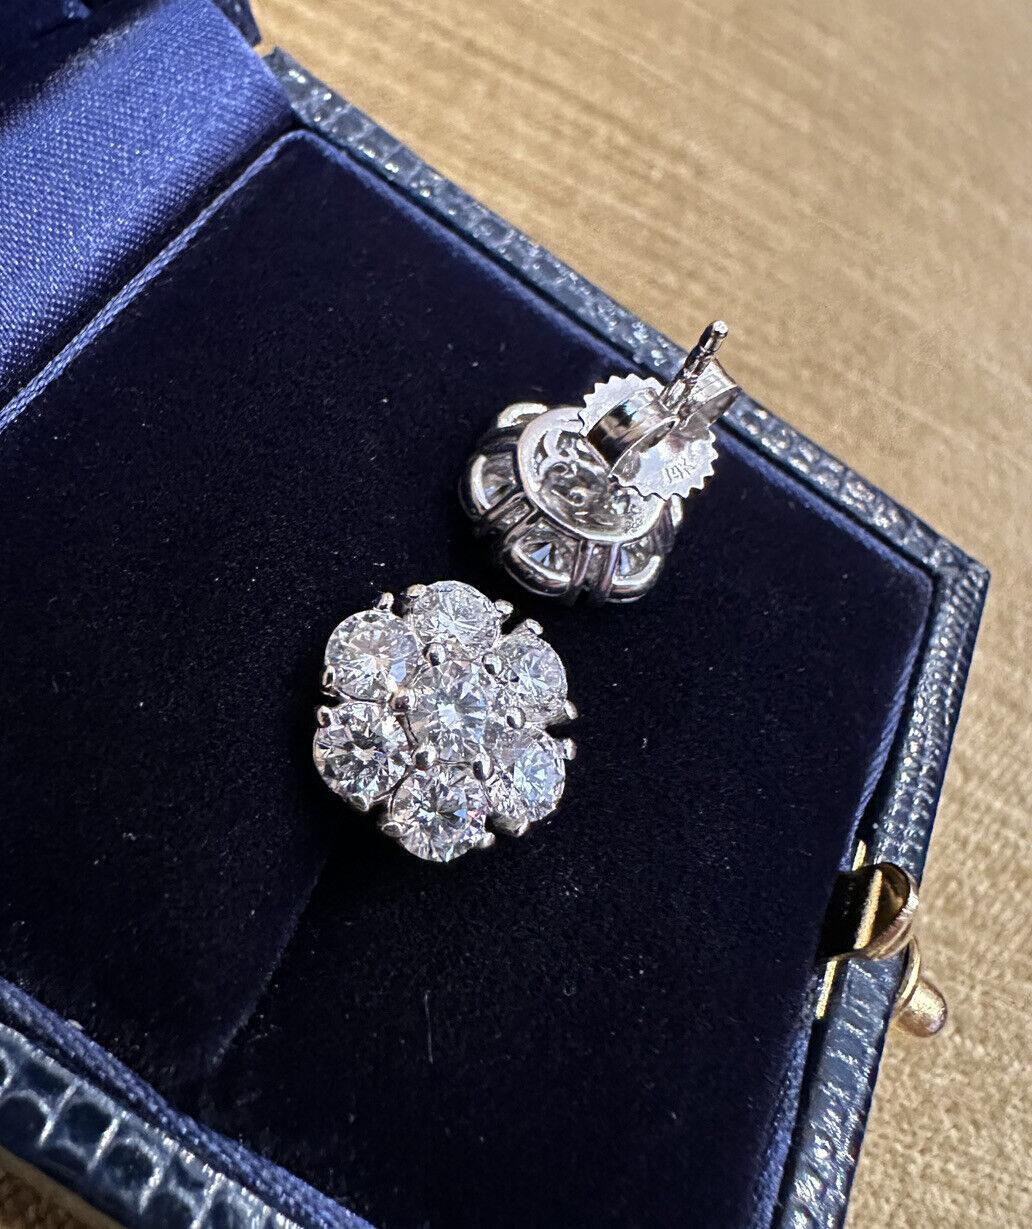 Diamond Floret Cluster Stud Earrings 3.10 Carat Total Weight in 14k White Gold In Excellent Condition For Sale In La Jolla, CA